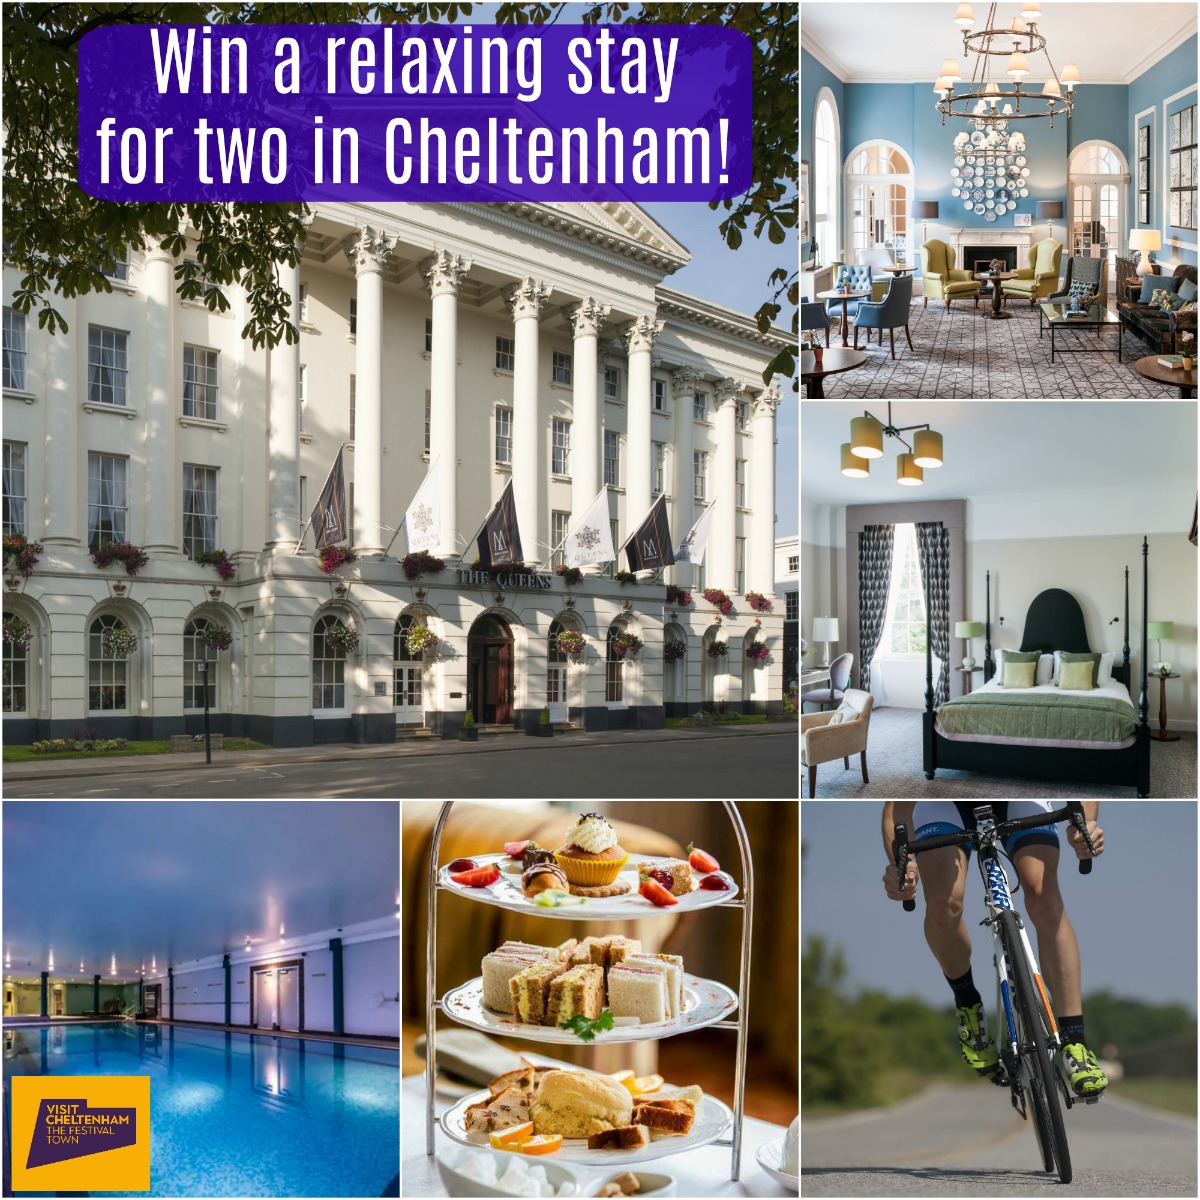 Giveaway poster - win a relaxing stay for two in Cheltenham